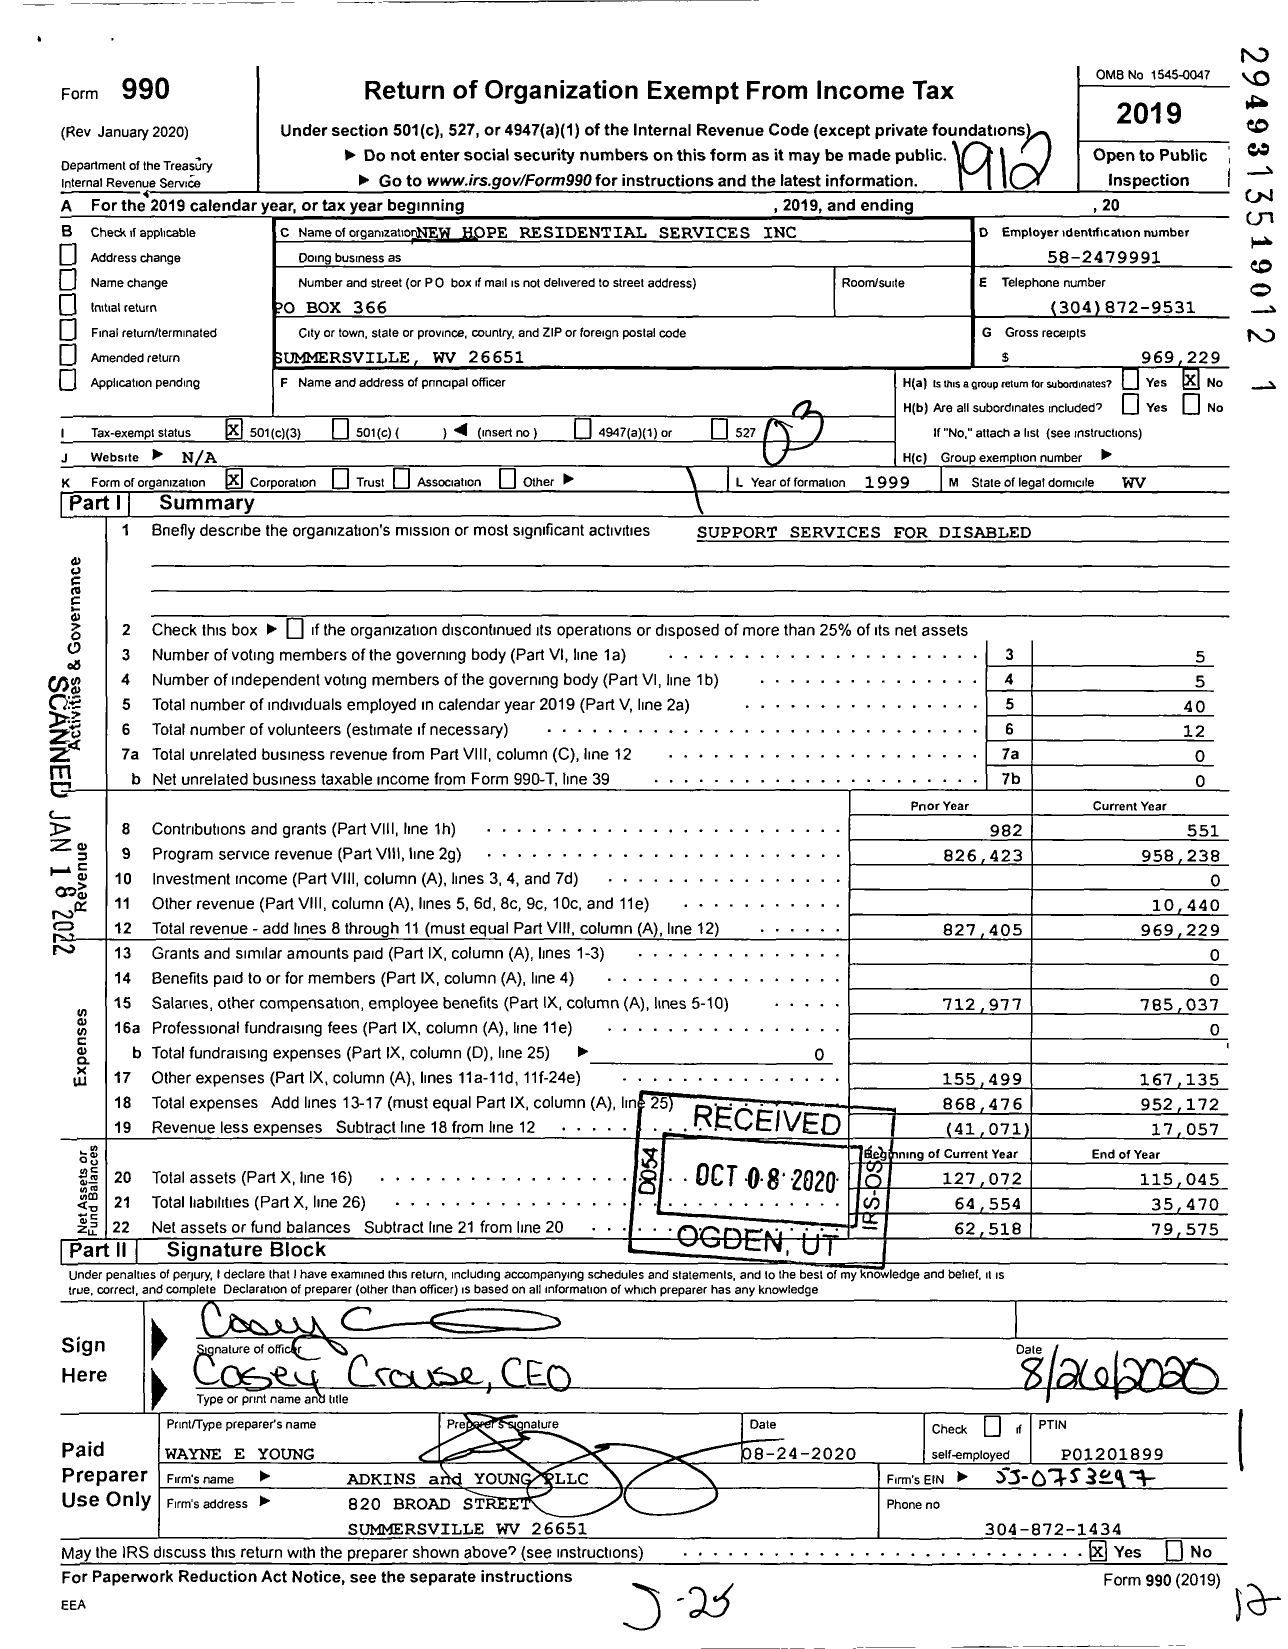 Image of first page of 2019 Form 990 for New Hope Residential Services